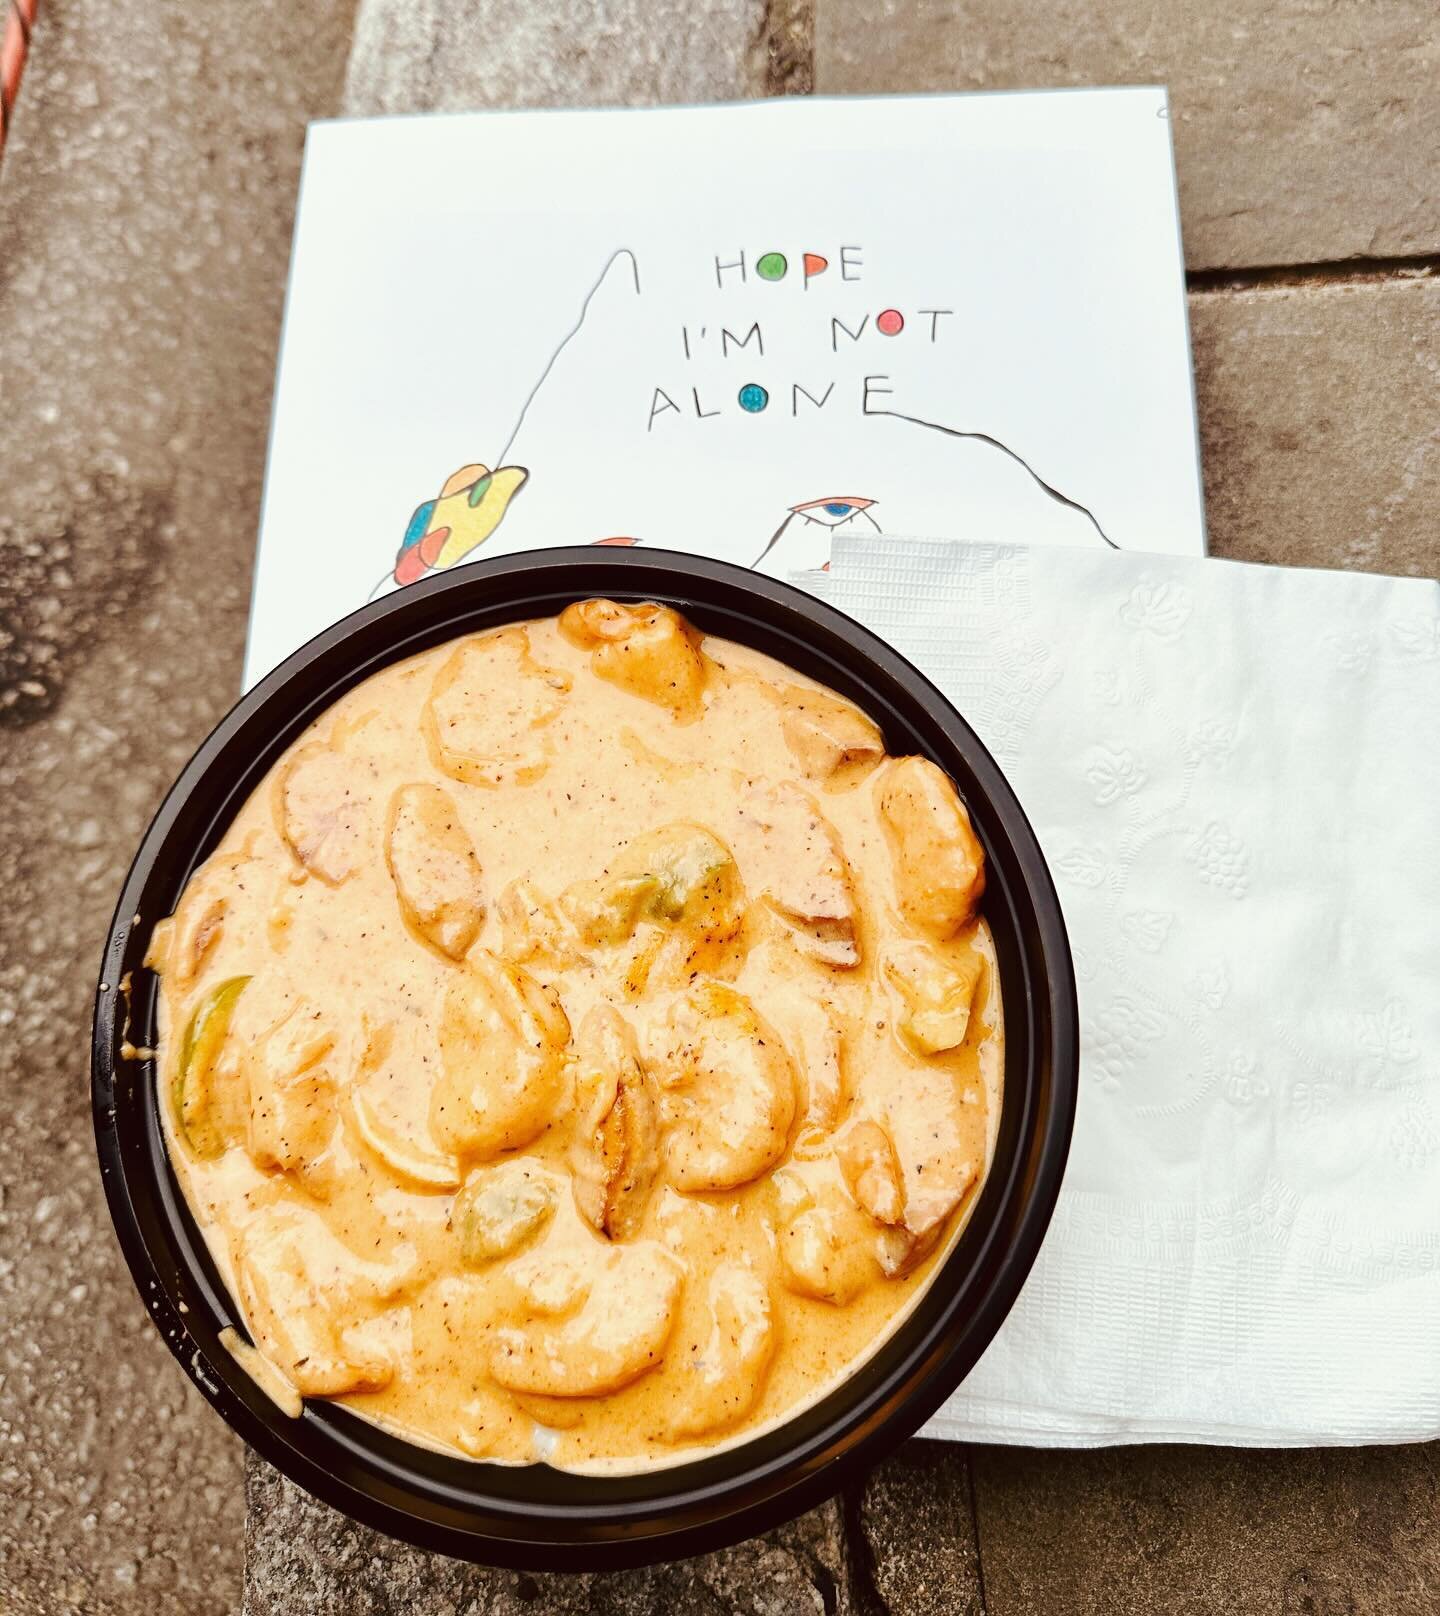 Two lovely 2nd Sunday finds, Lauren Ridenour&lsquo;s new book &ldquo;I hope I&rsquo;m not alone&ldquo; and KJ Barbecue&rsquo;s Shrimp and Grits. Tate Nation tells us it&rsquo;s the best he&rsquo;s ever had!